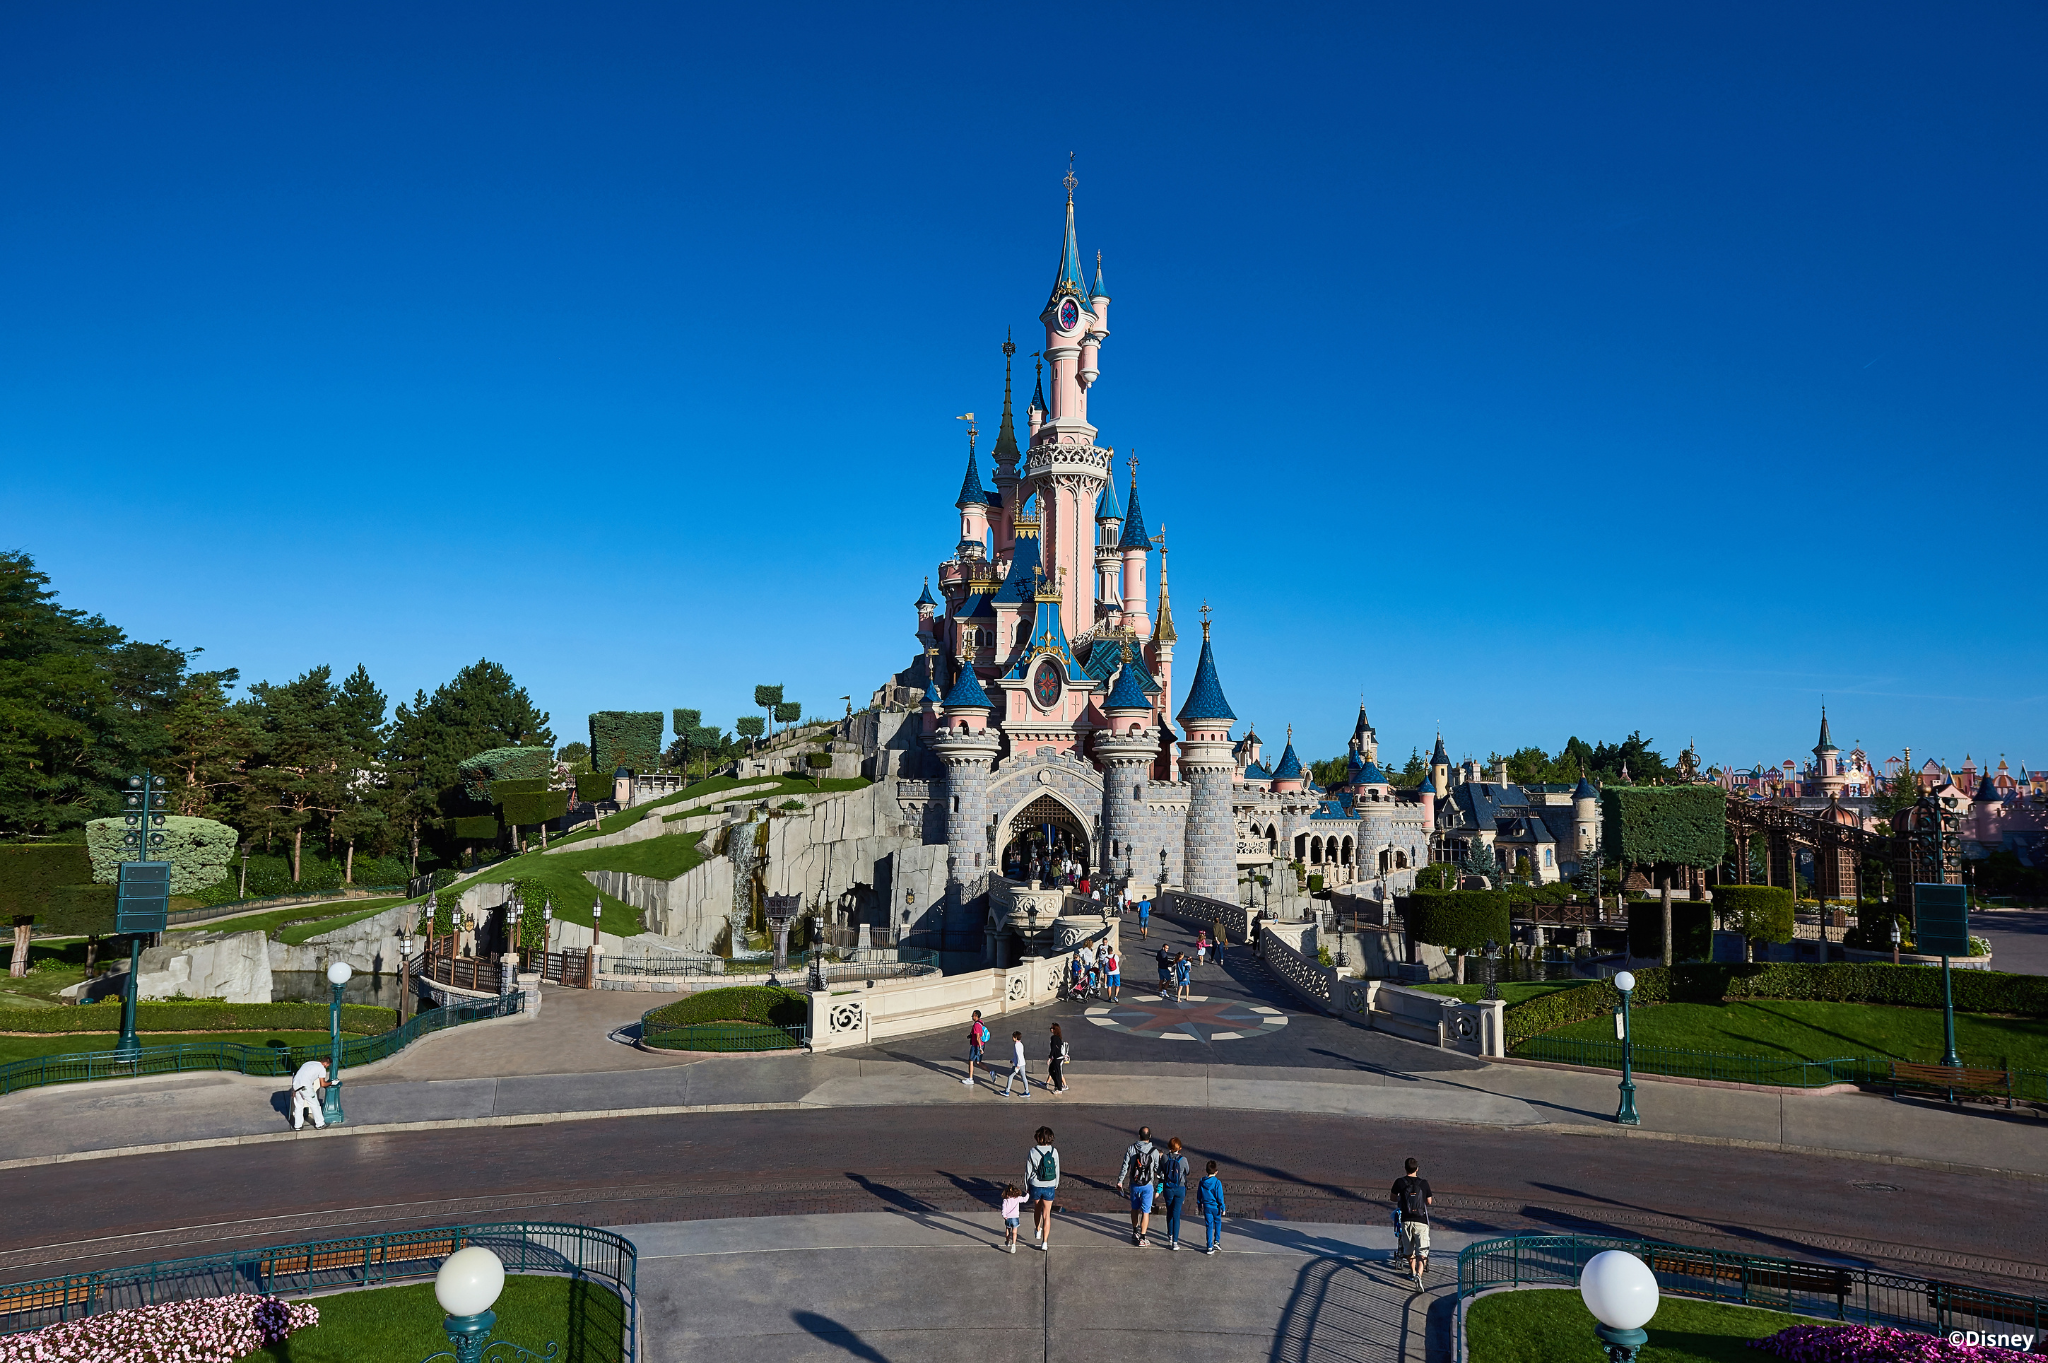 Trip Summary Of Disneyland Paris For The First Time In 12+ Years